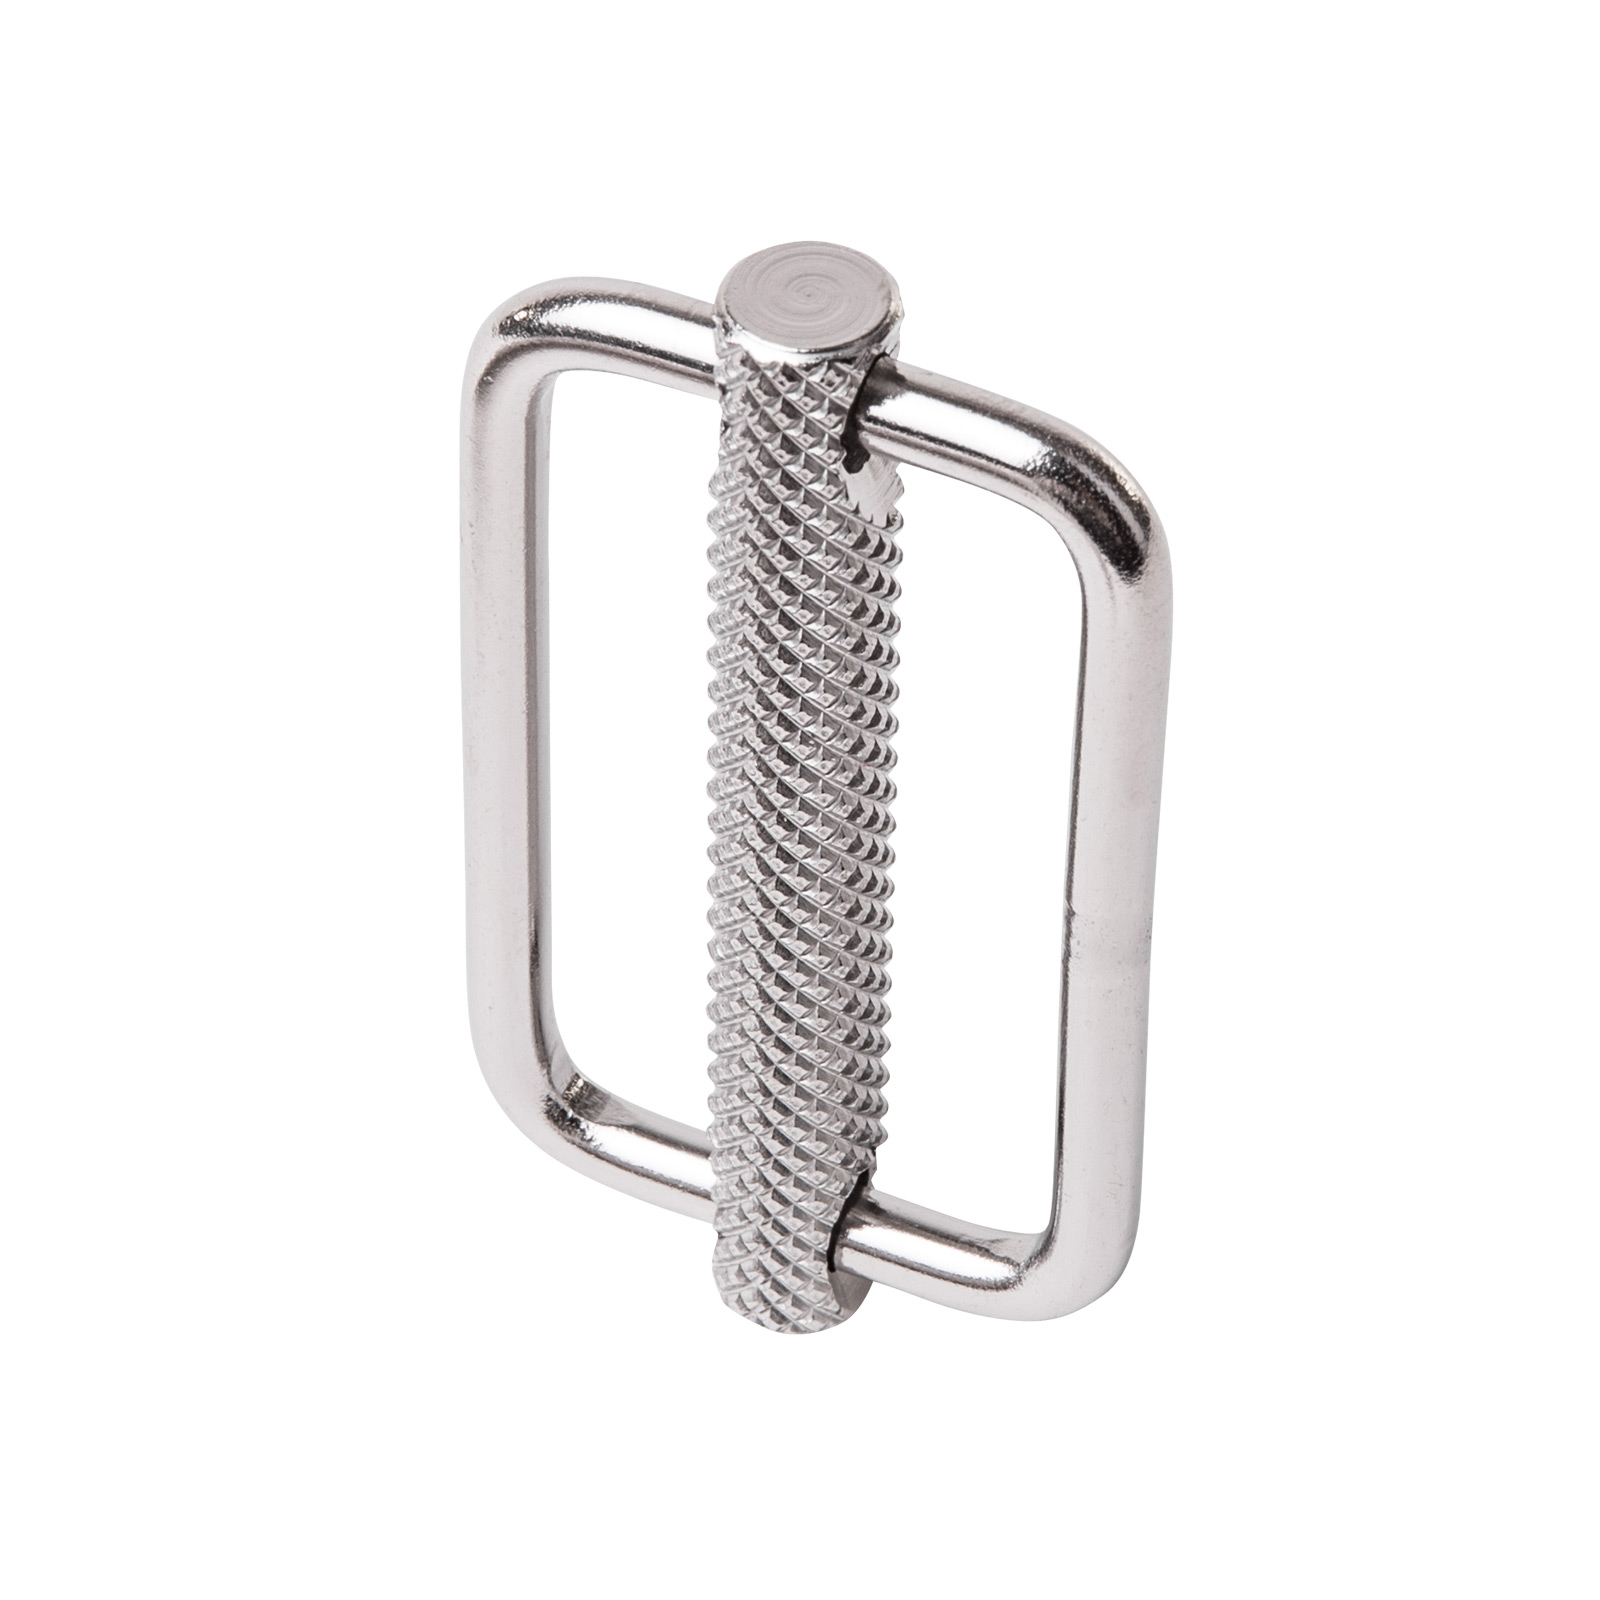 DR-6 Stainless Steel Webbing Keeper with Sliding Bar